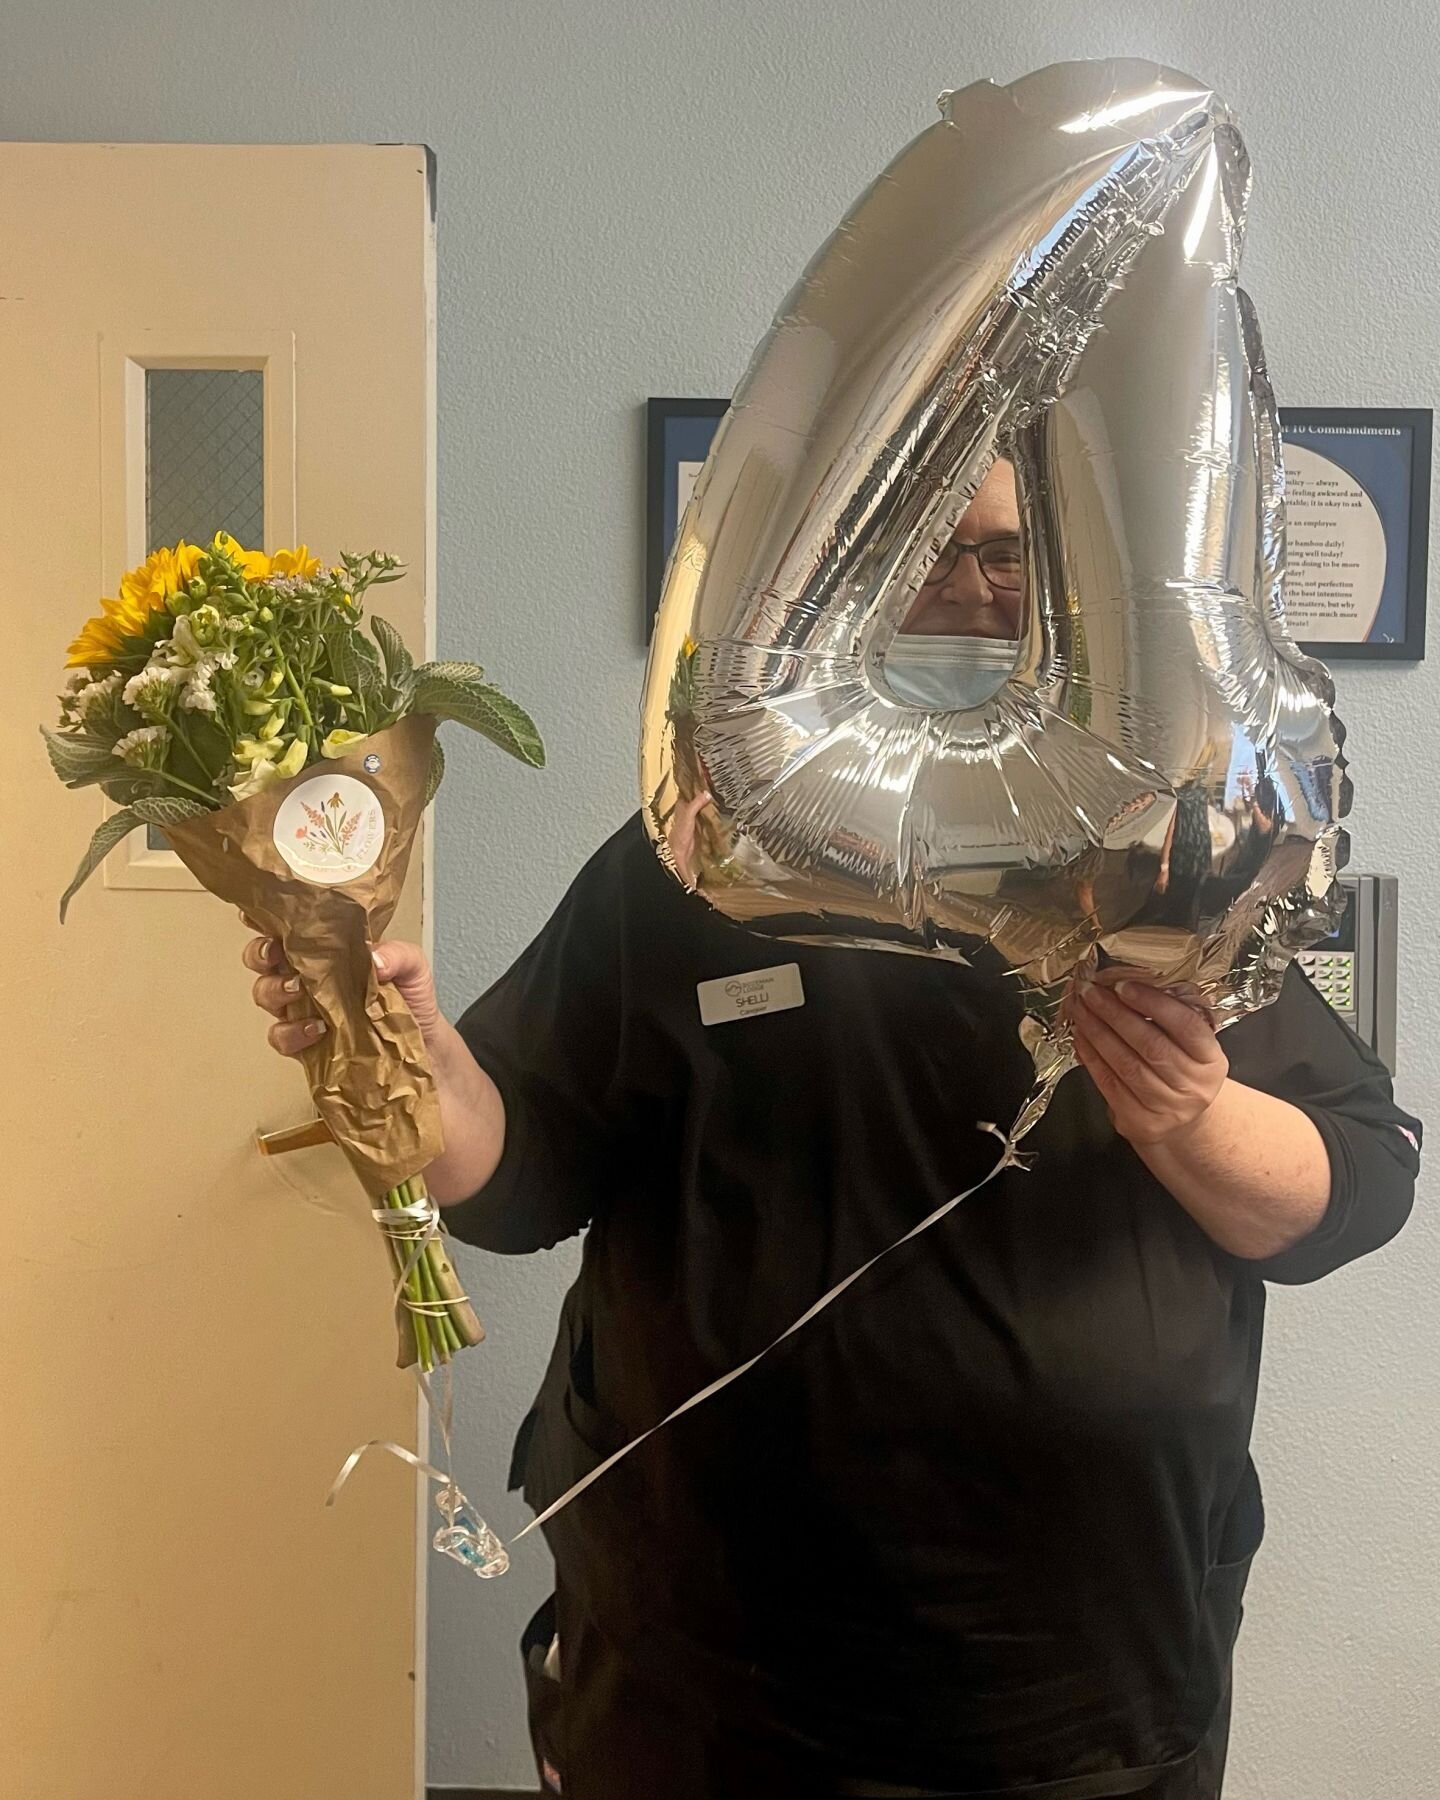 We are celebrating the 4-year work anniversary of Shelli, one of our amazing caregivers at Bozeman Lodge! Those who know Shelli best shared that she is always smiling, making others smile and laugh all the while taking the best care of our residents.